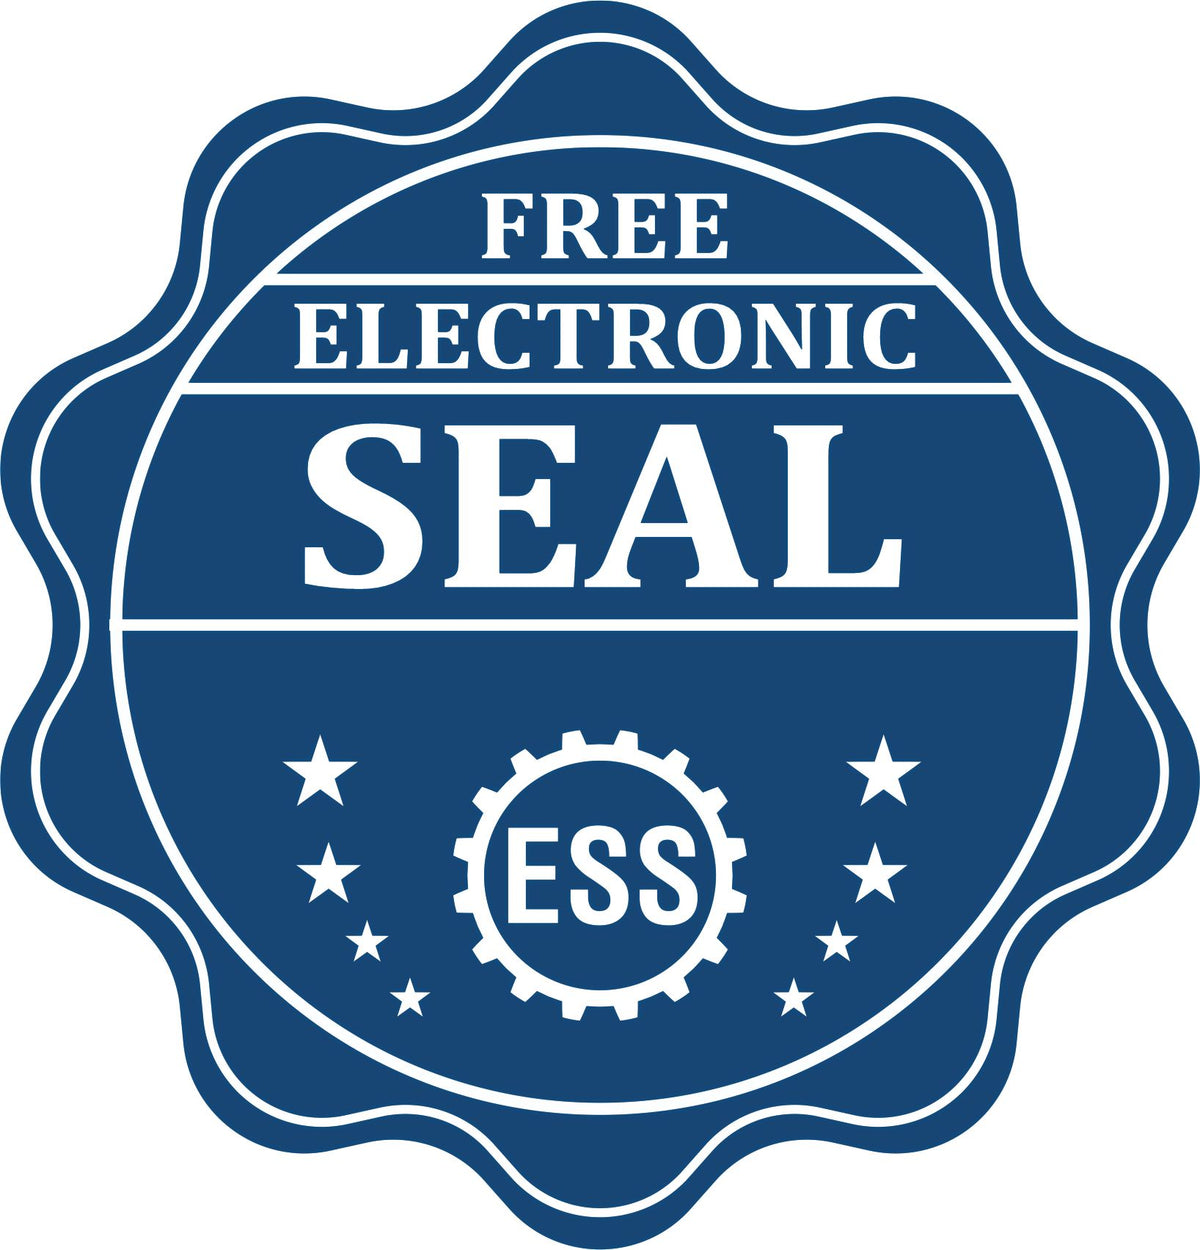 A badge showing a free electronic seal for the Vermont Professional Engineer Seal Stamp with stars and the ESS gear on the emblem.